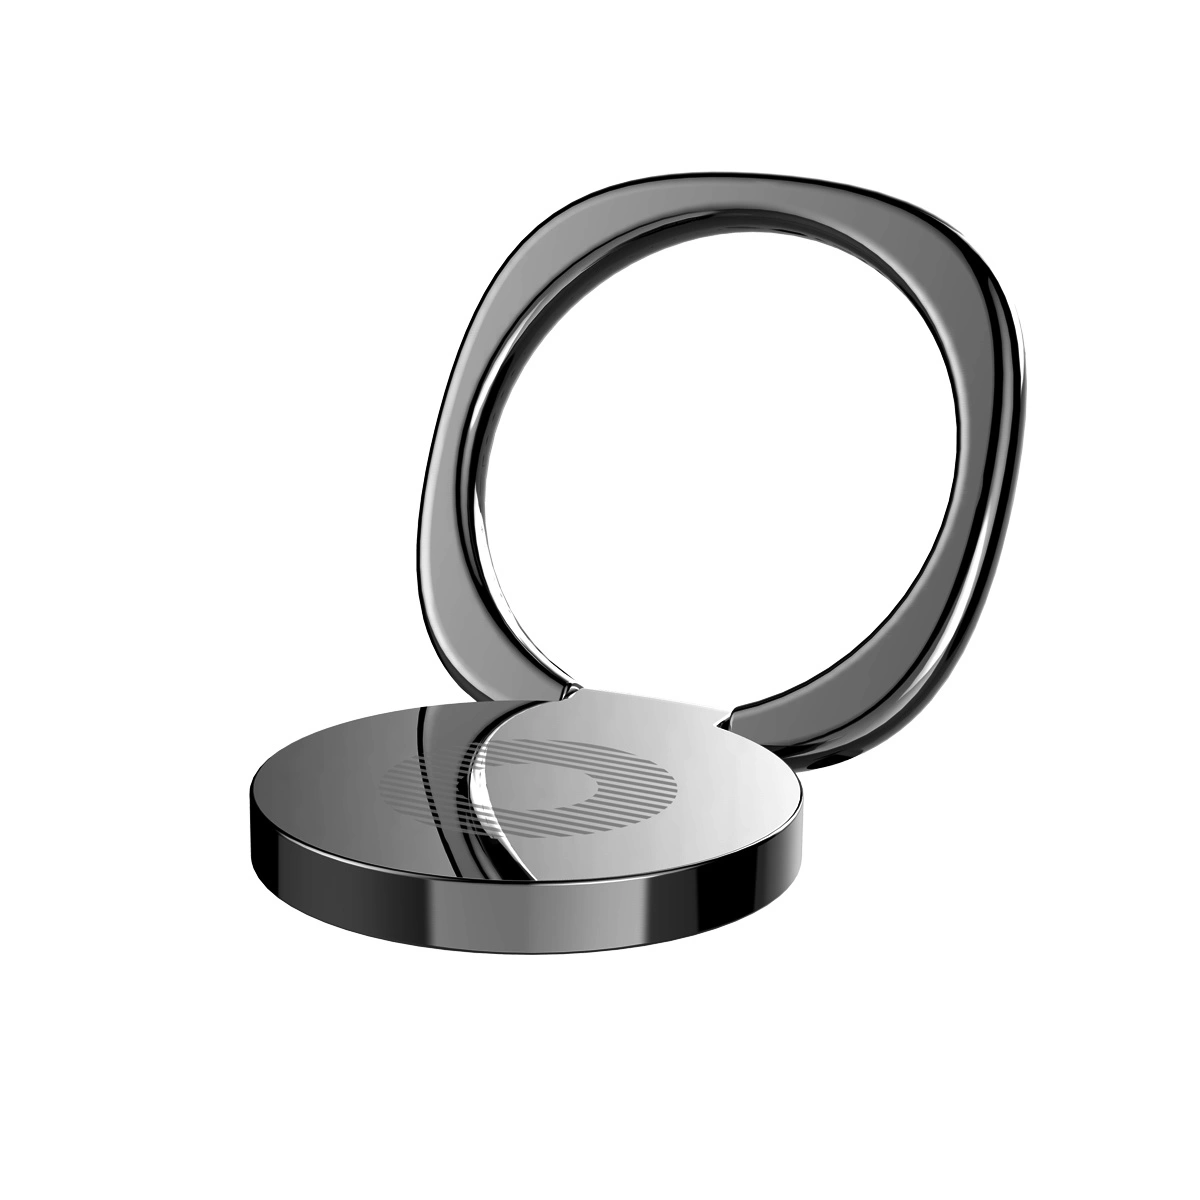 Black Baseus Privity Ring holder with stand function on a white background